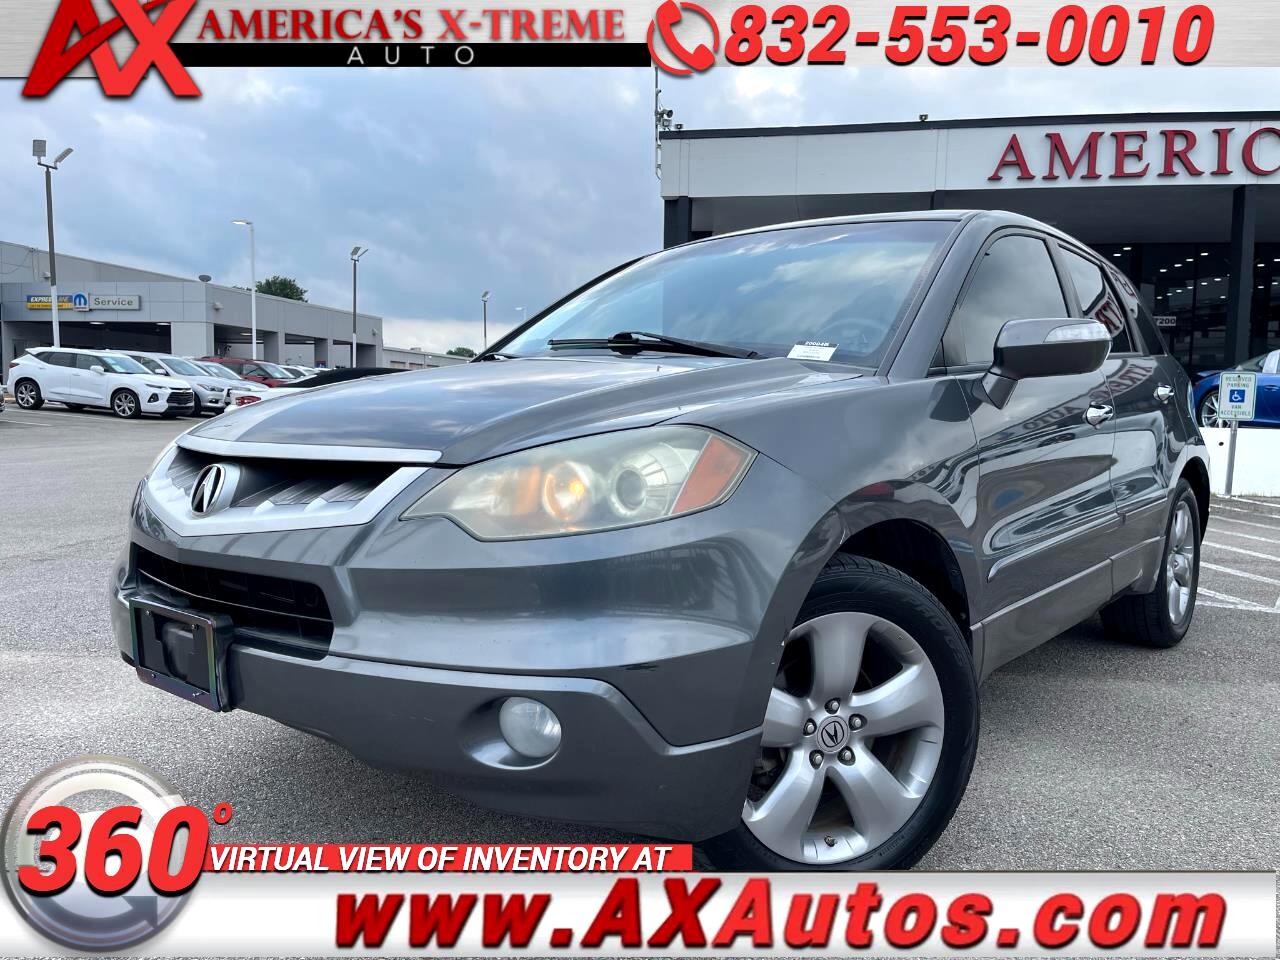 2008 Acura RDX 5-Spd AT with Technology Package